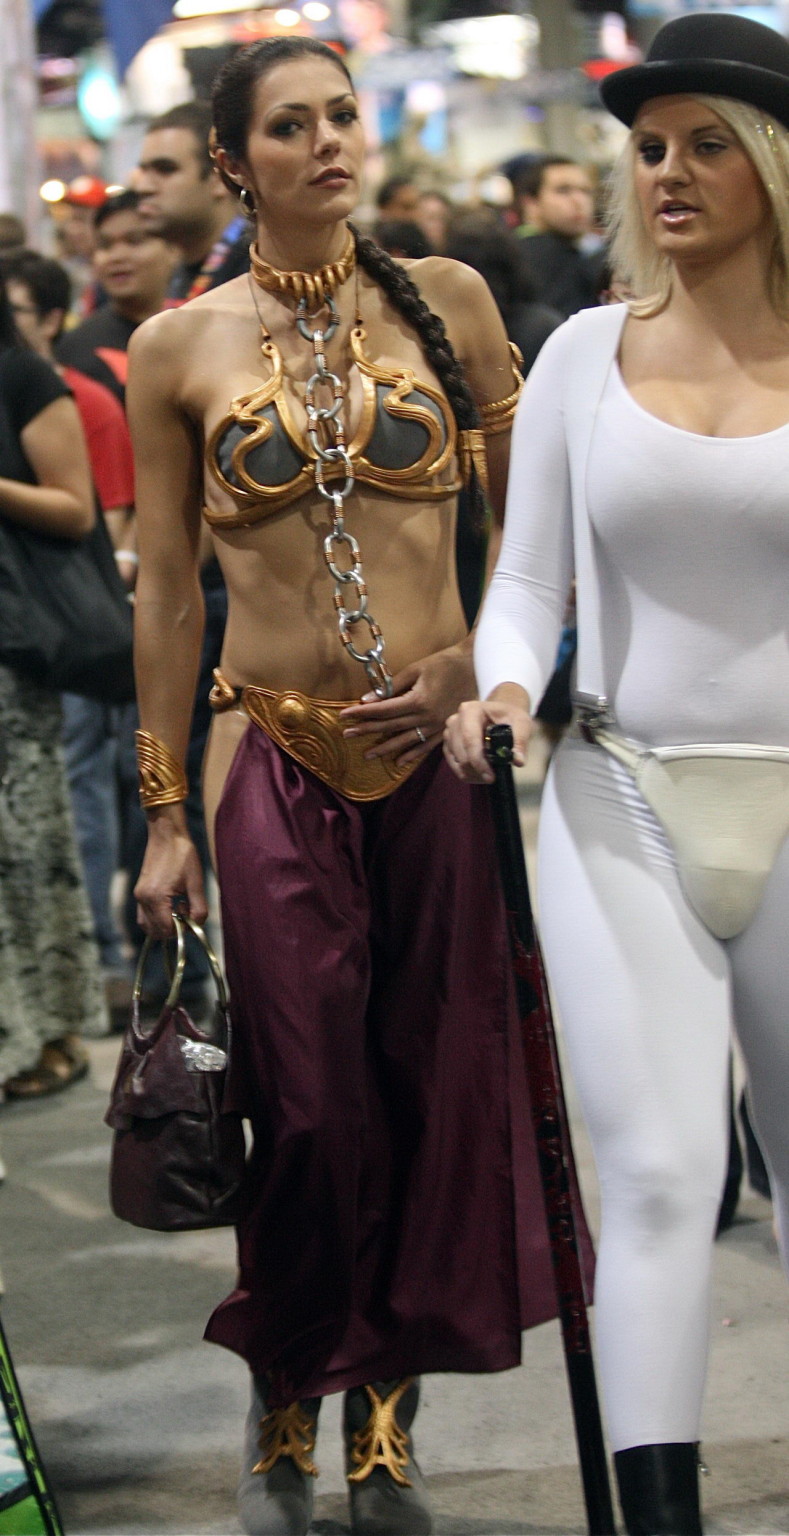 Adrianne Curry in sexy Princess Leia outfit at the Comic Con convention in San D #75339898